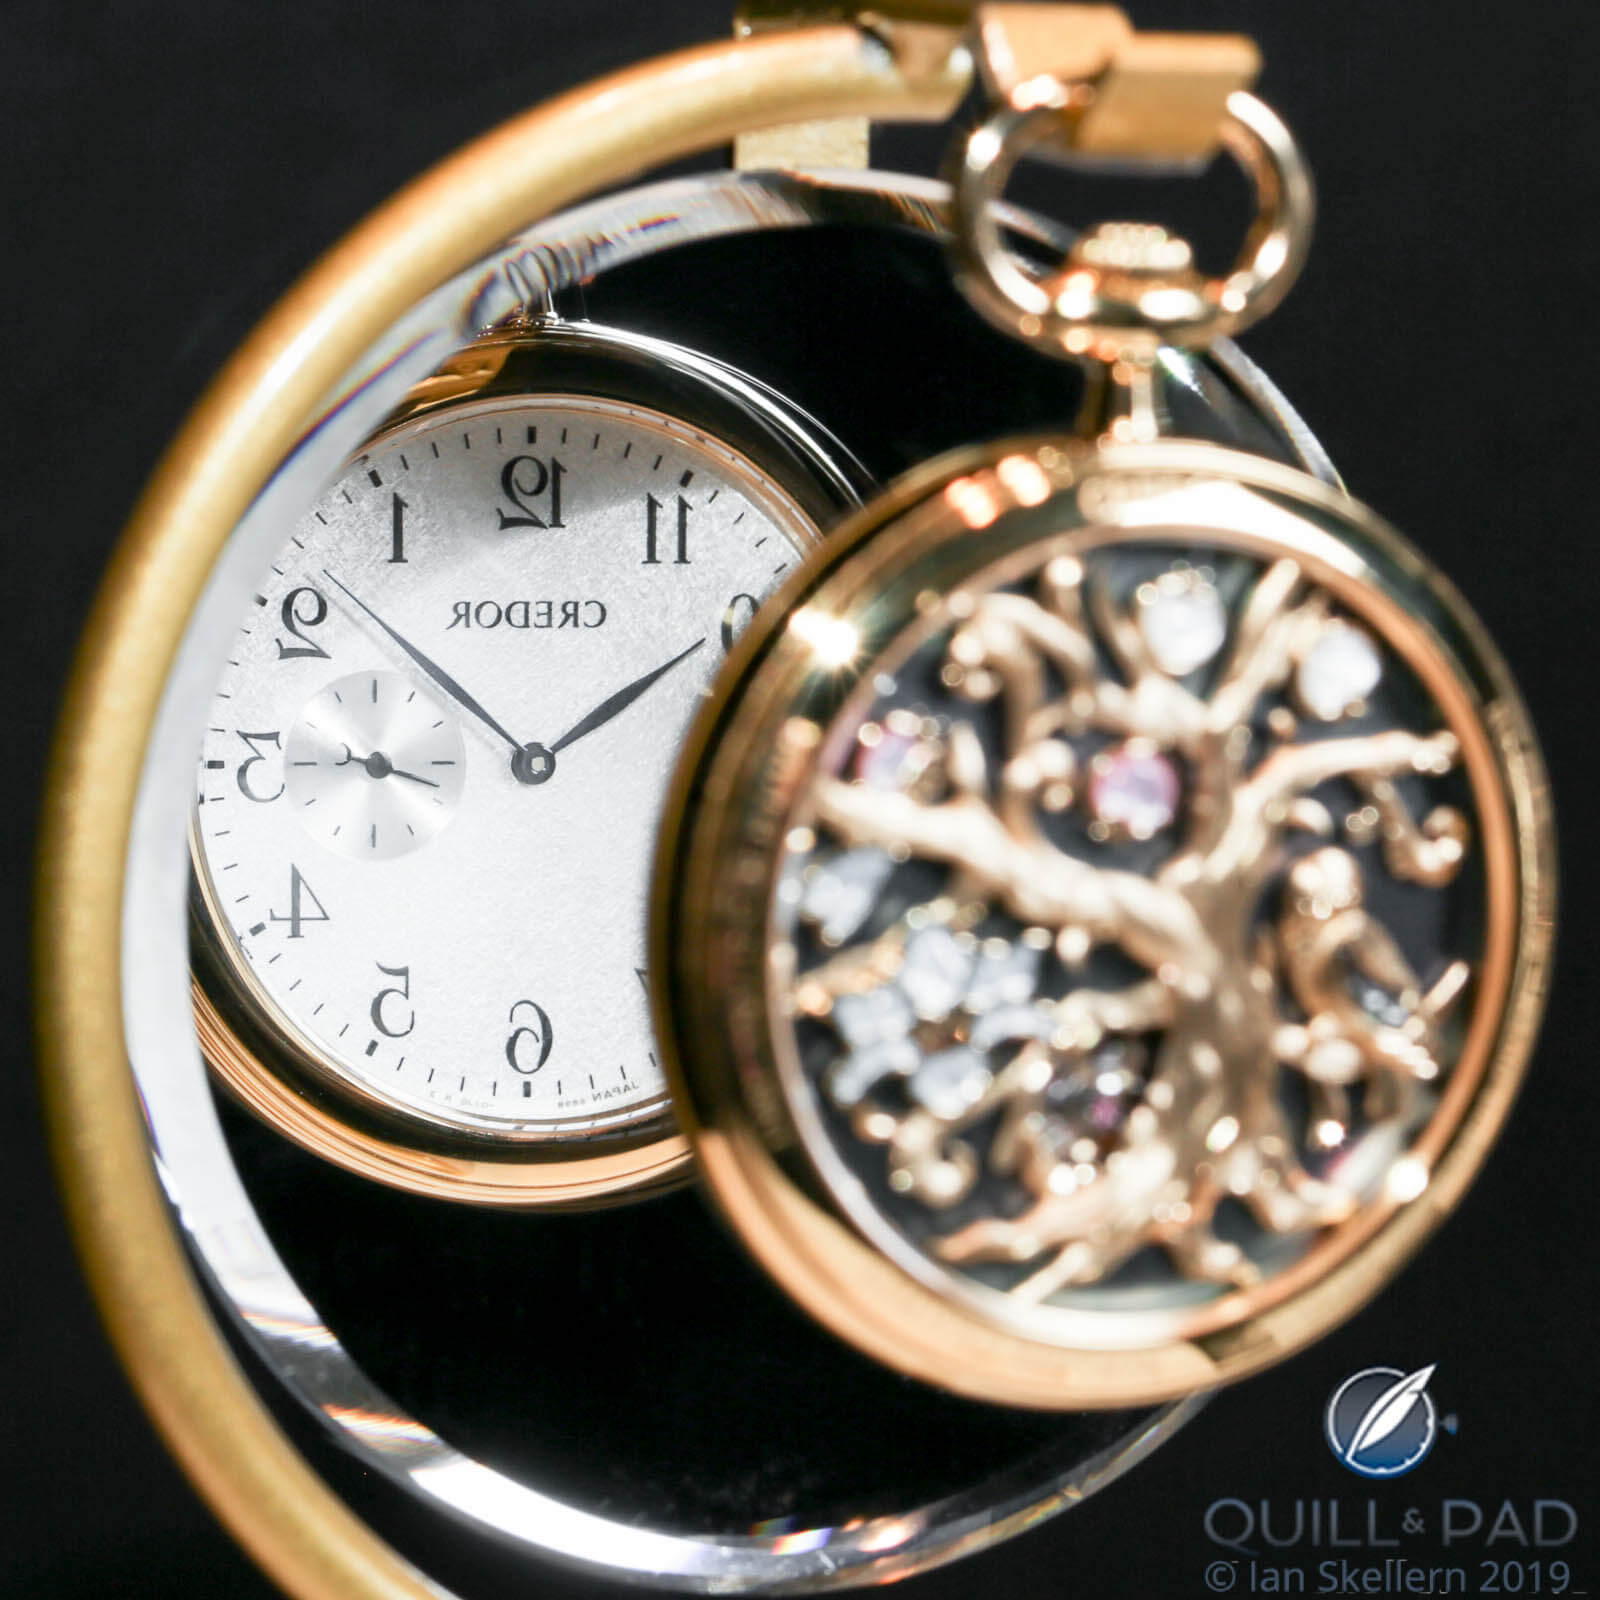 Reflected dial of the Seiko Credor Reference GXBE998 Pocket Watch